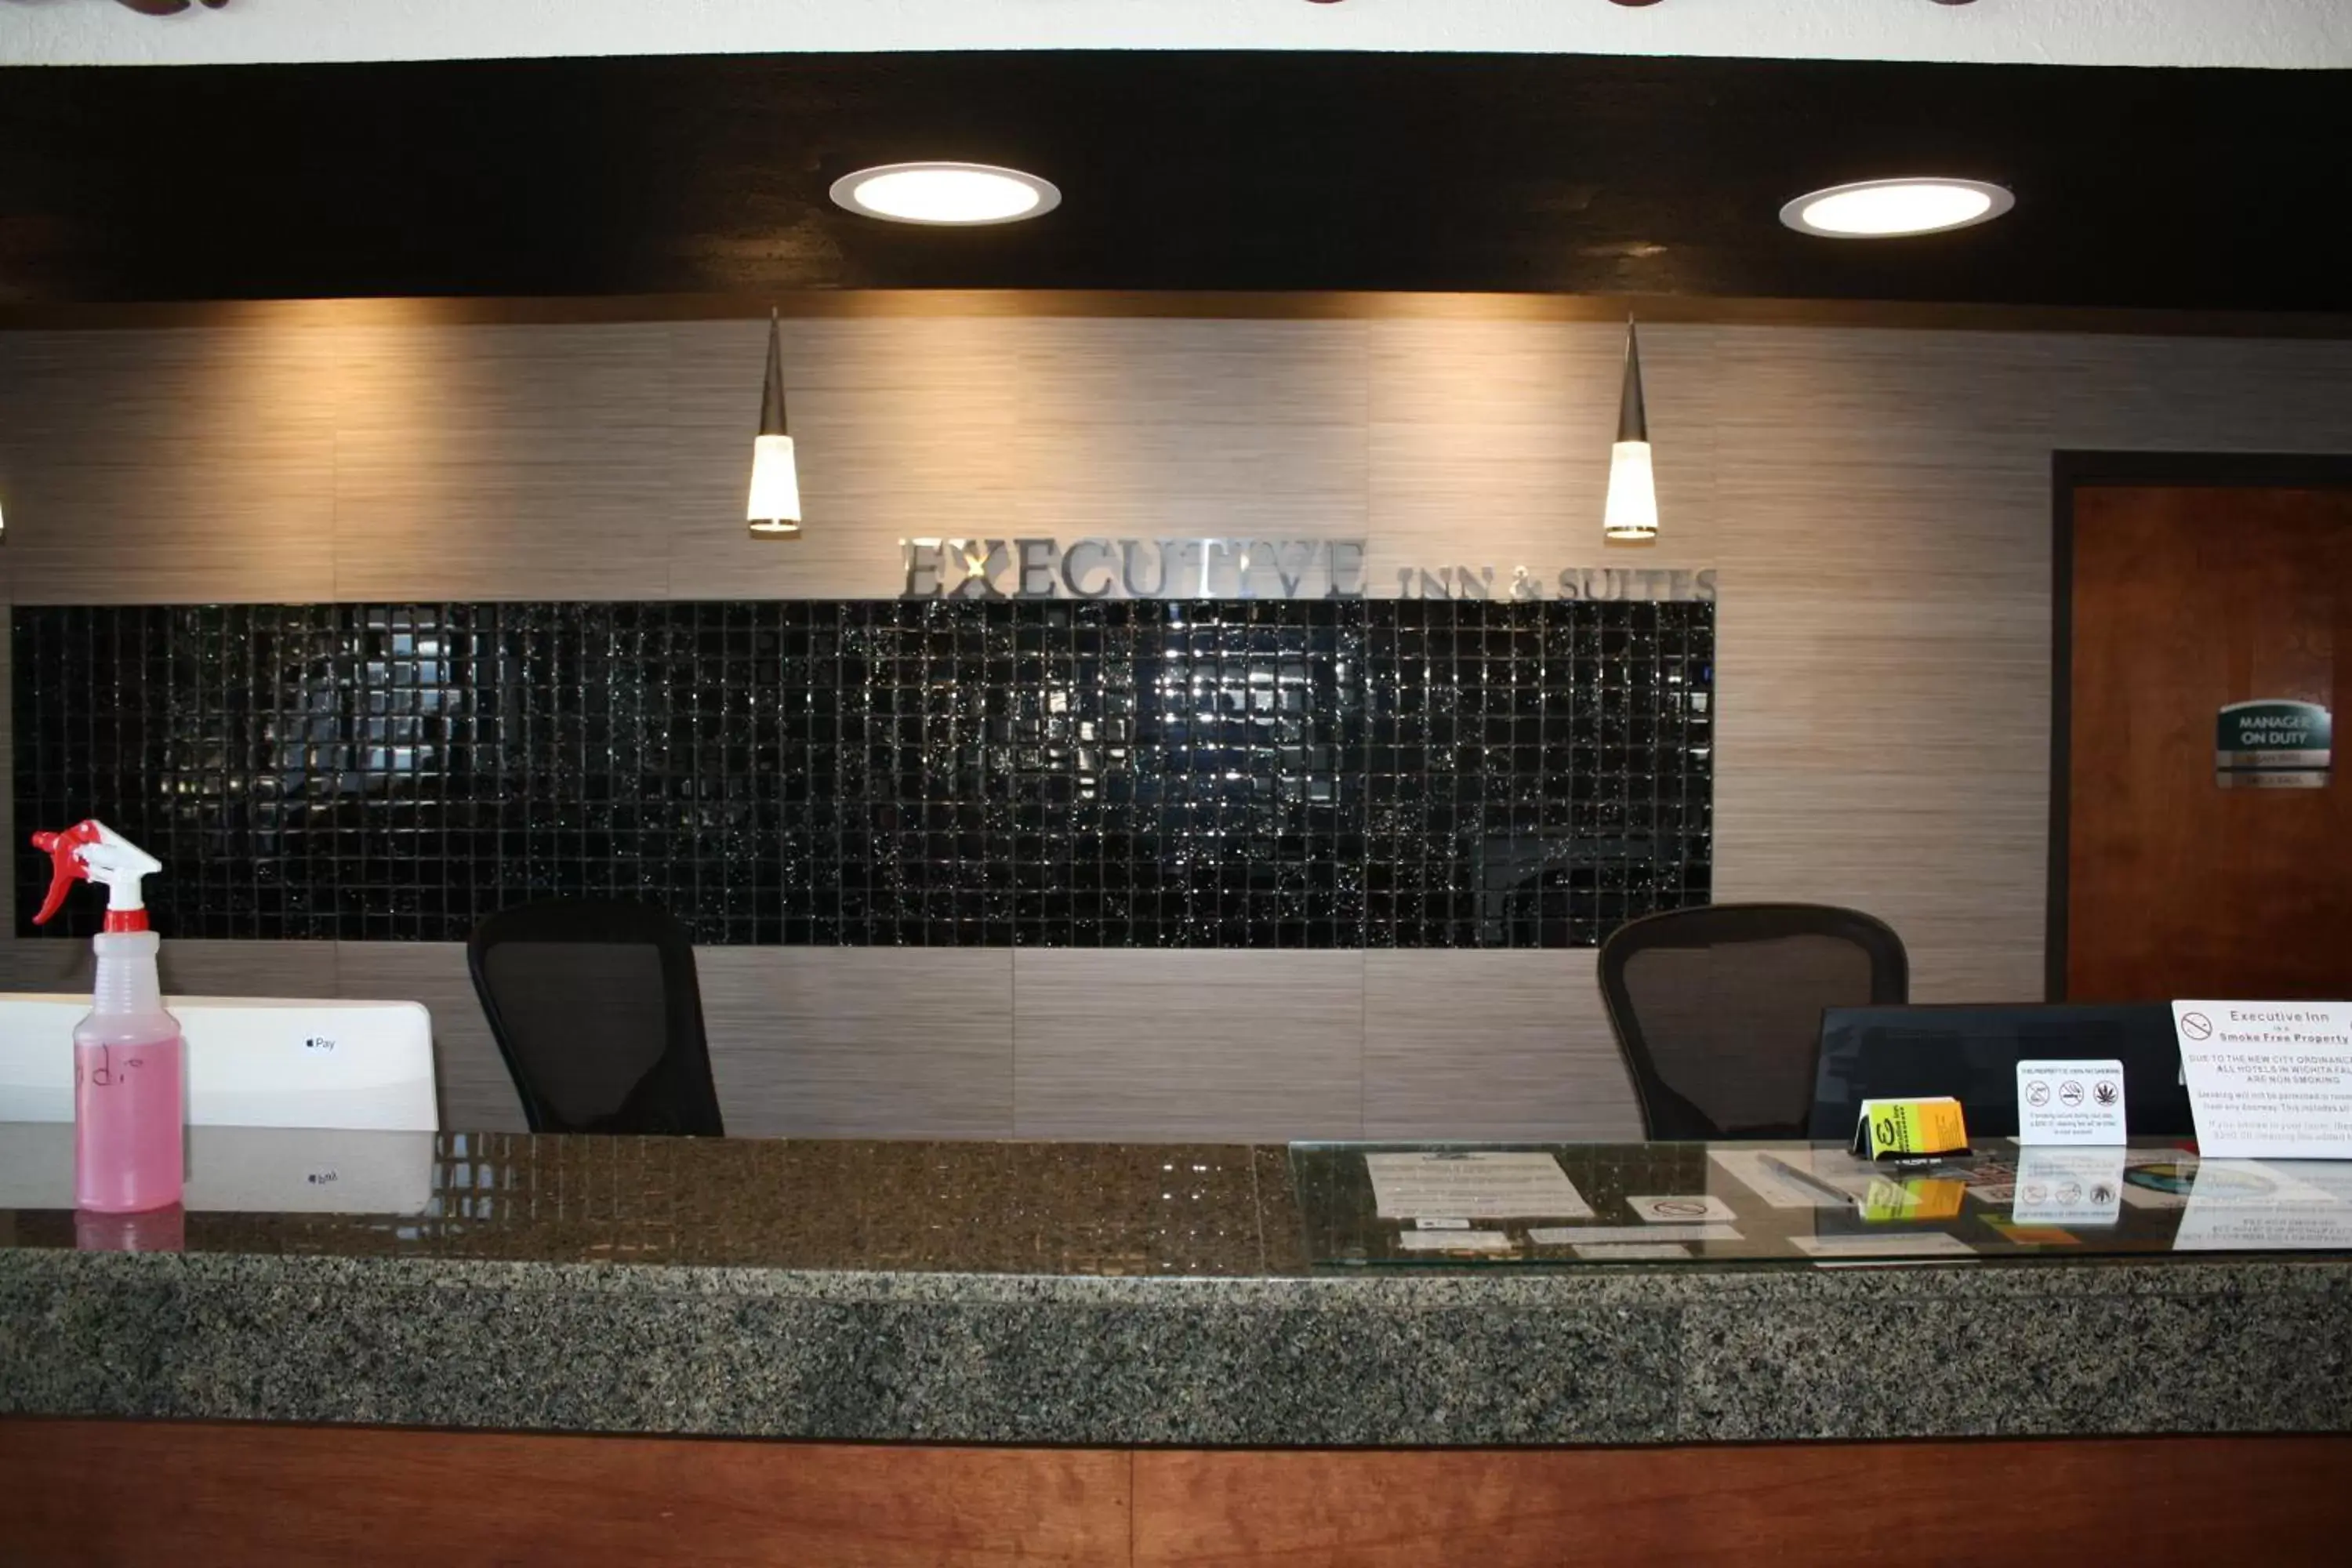 Property building, Lobby/Reception in Executive Inn and Suites Wichita Falls